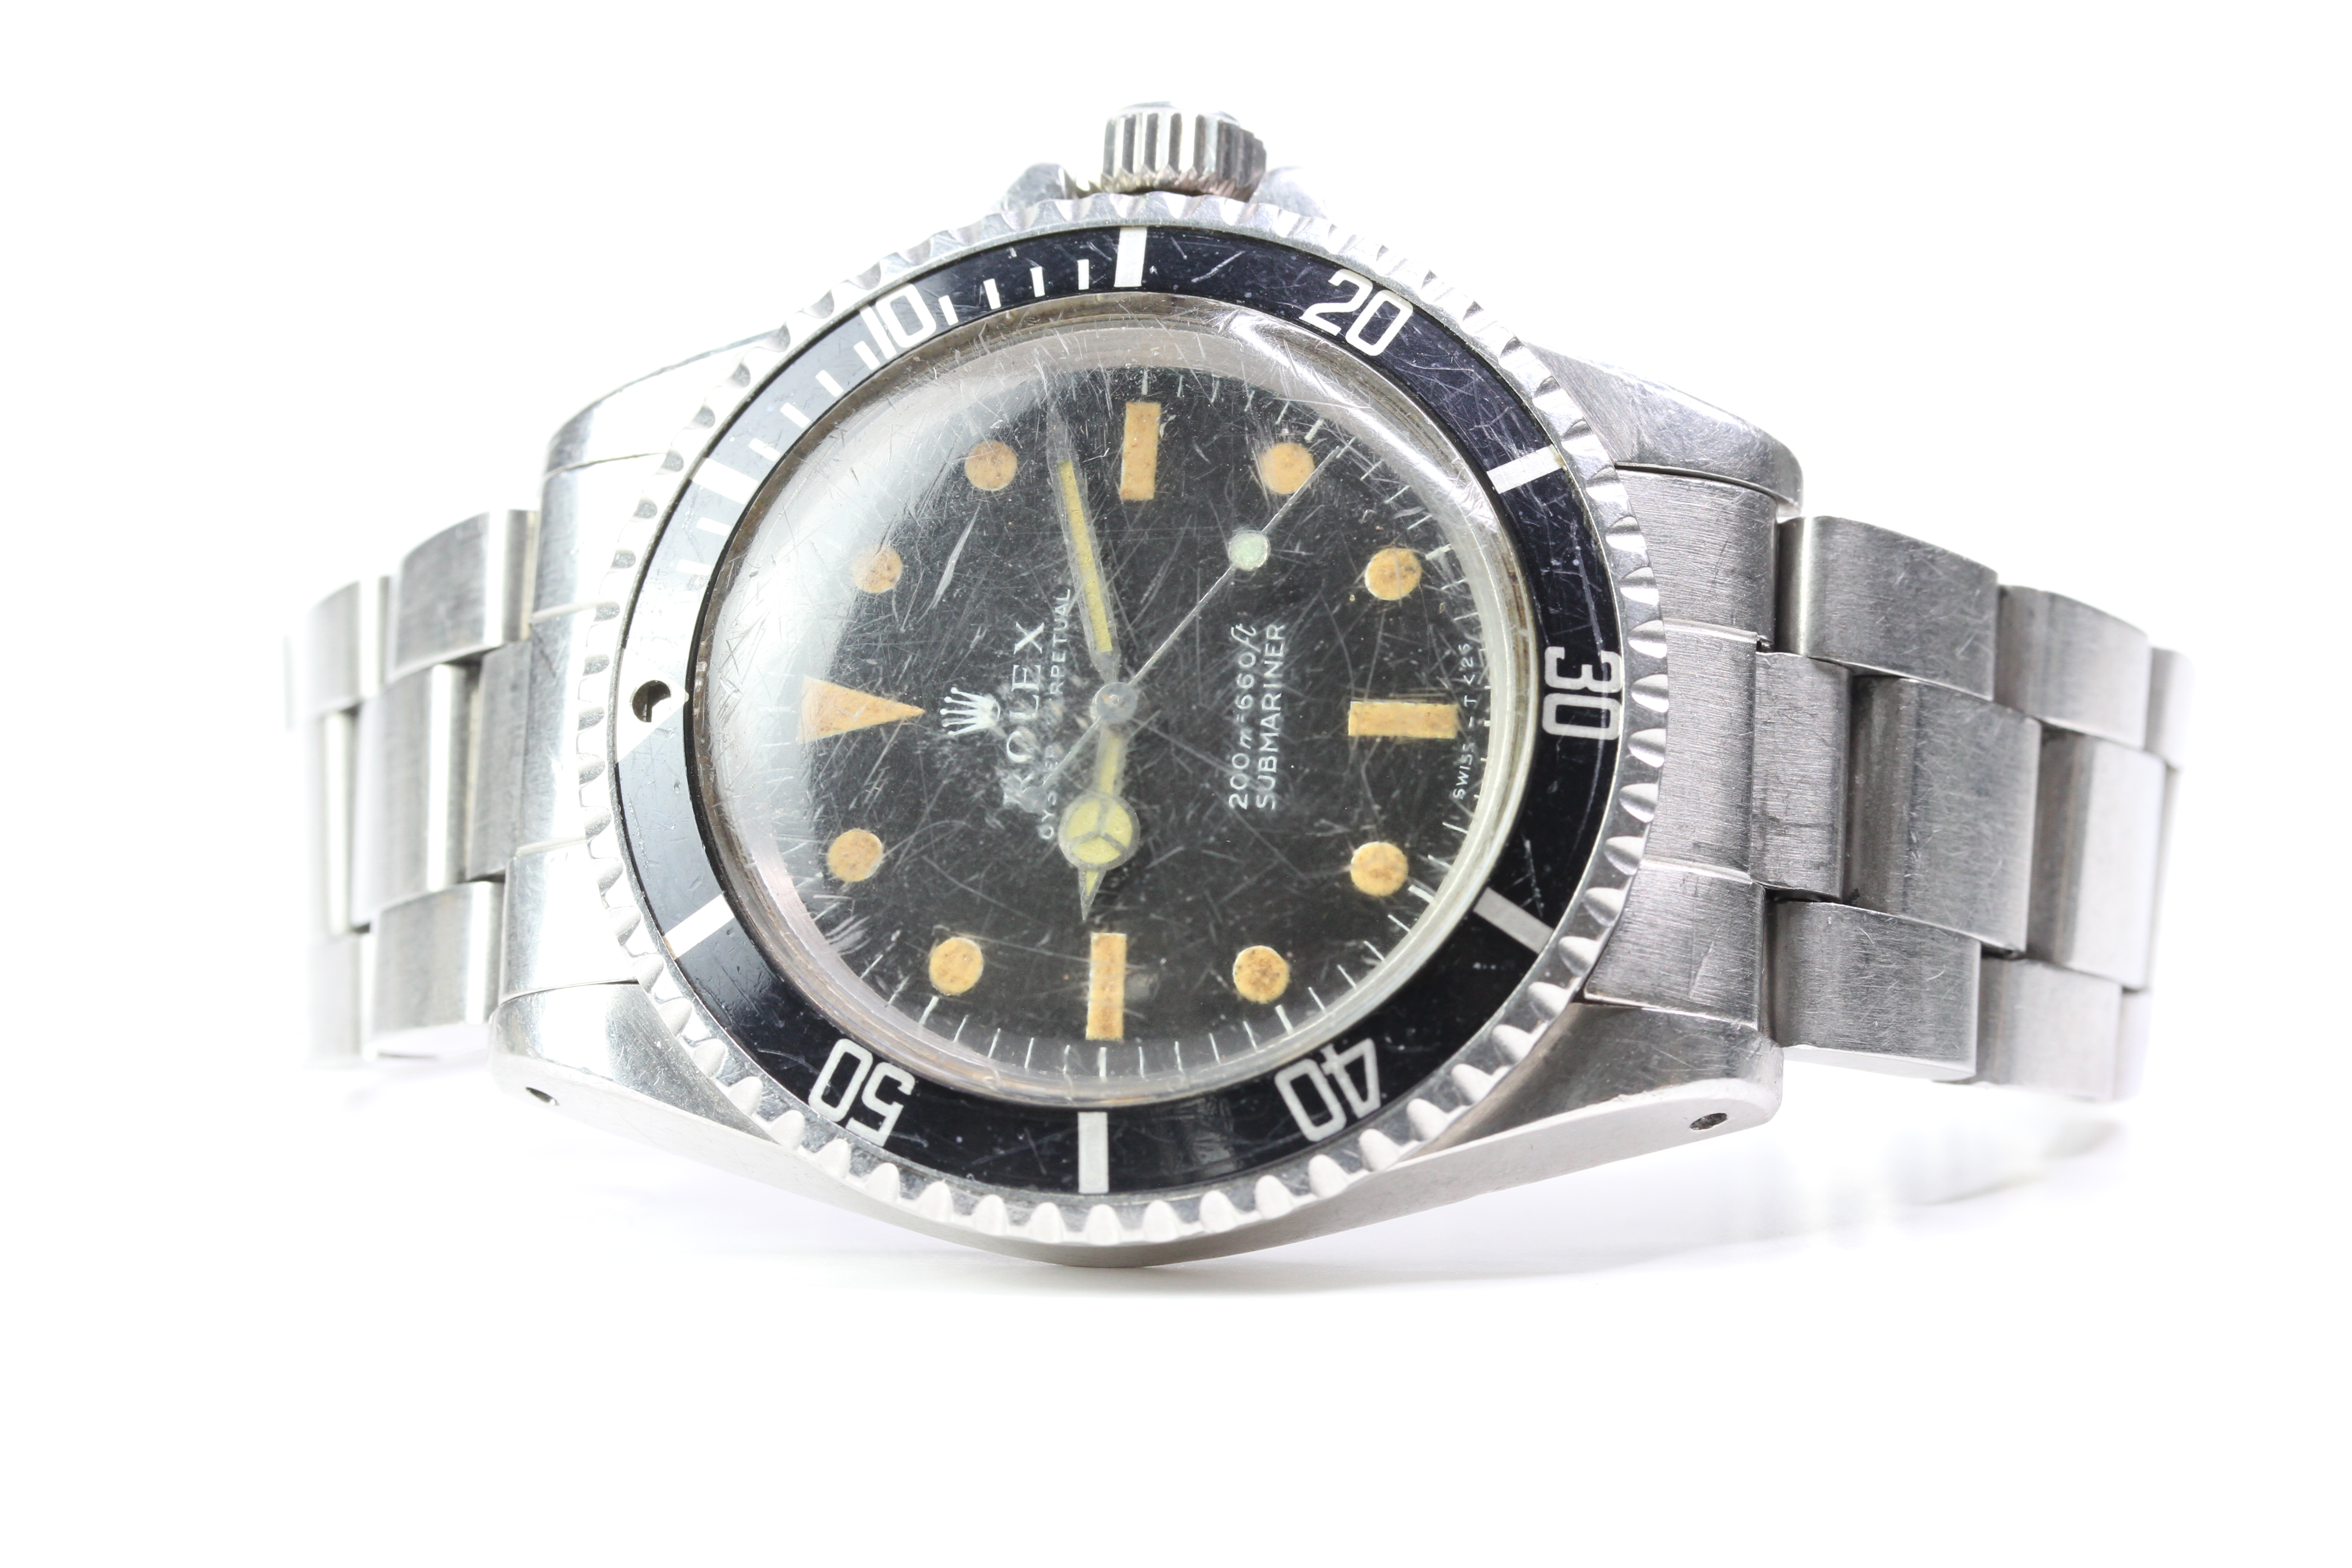 VINTAGE ROLEX SUBMARINER REFERENCE 5513 CIRCA 1972 - Image 2 of 7